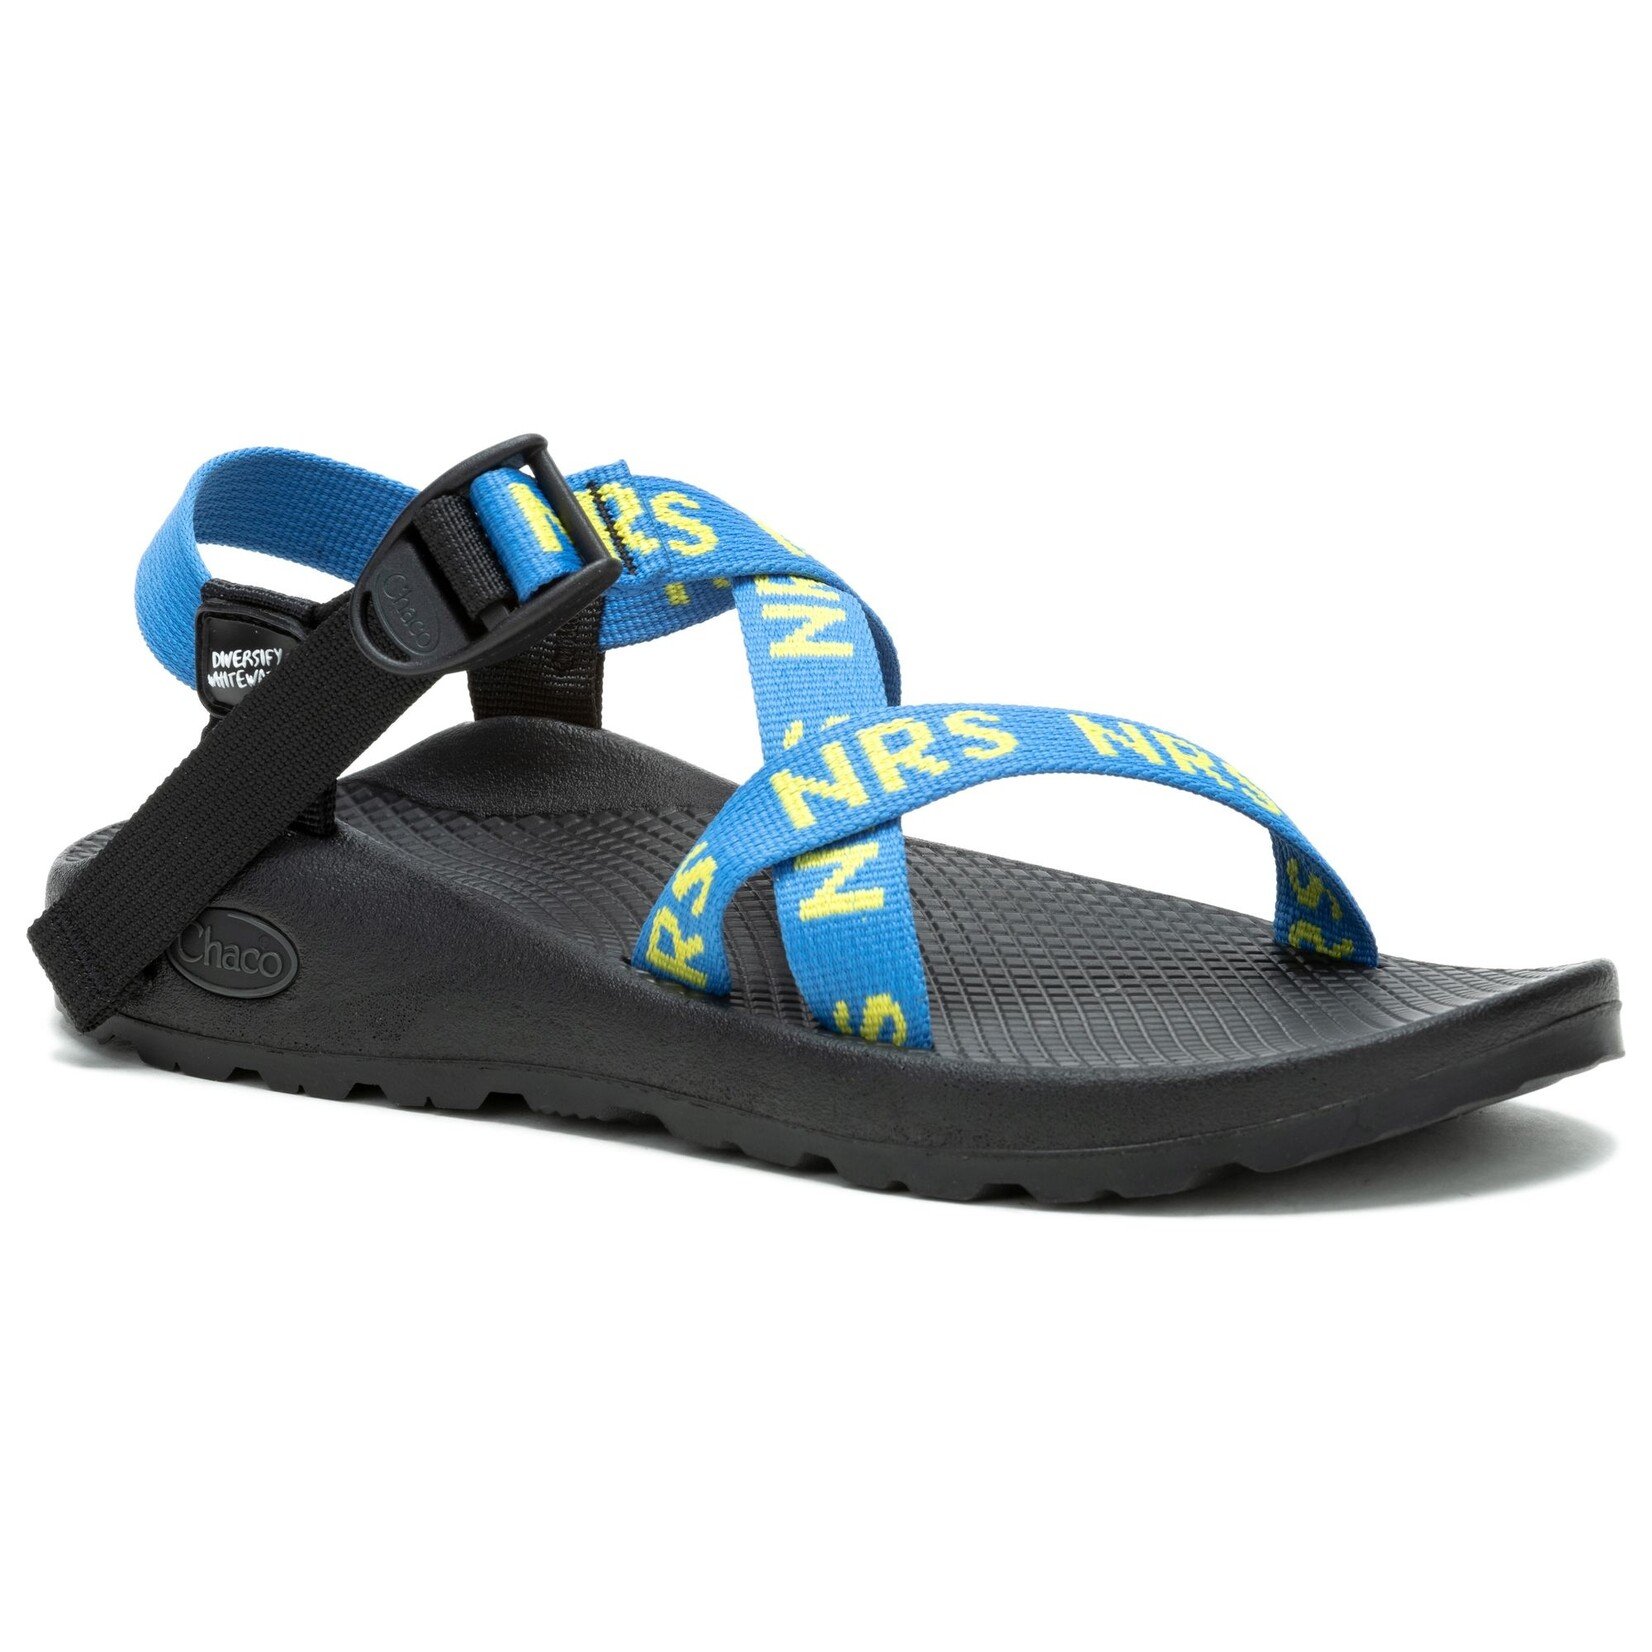 Chaco Chaco Women's Z/1 Classic with NRS Strap Webbing - Closeout